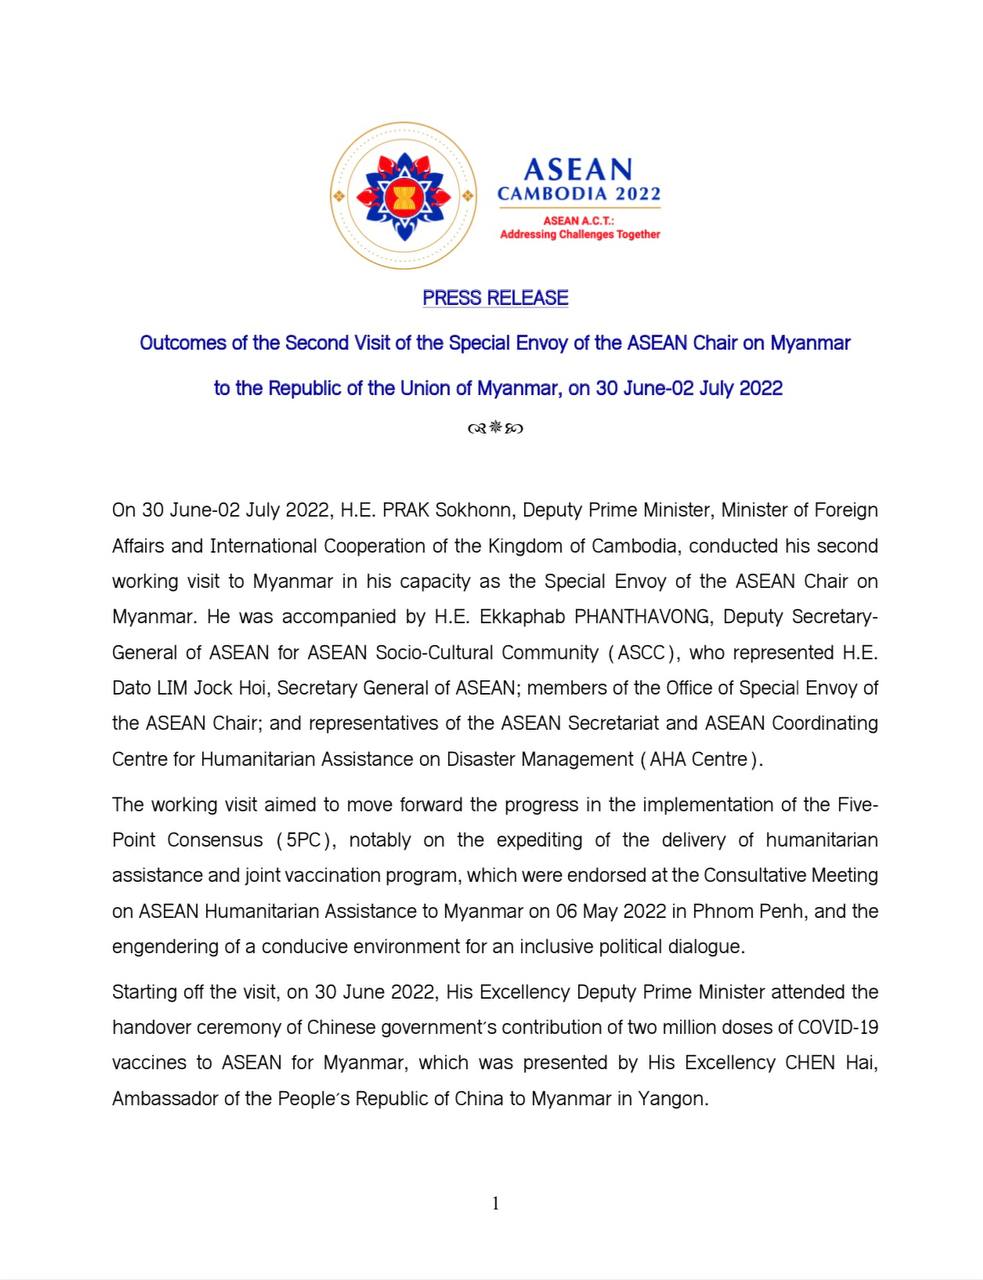 Outcomes of the Second Visit of the Special Envoy of the ASEAN Chair on Myanmar to the Republic of the Union of Myanmar, on 30 June-02 July 2022